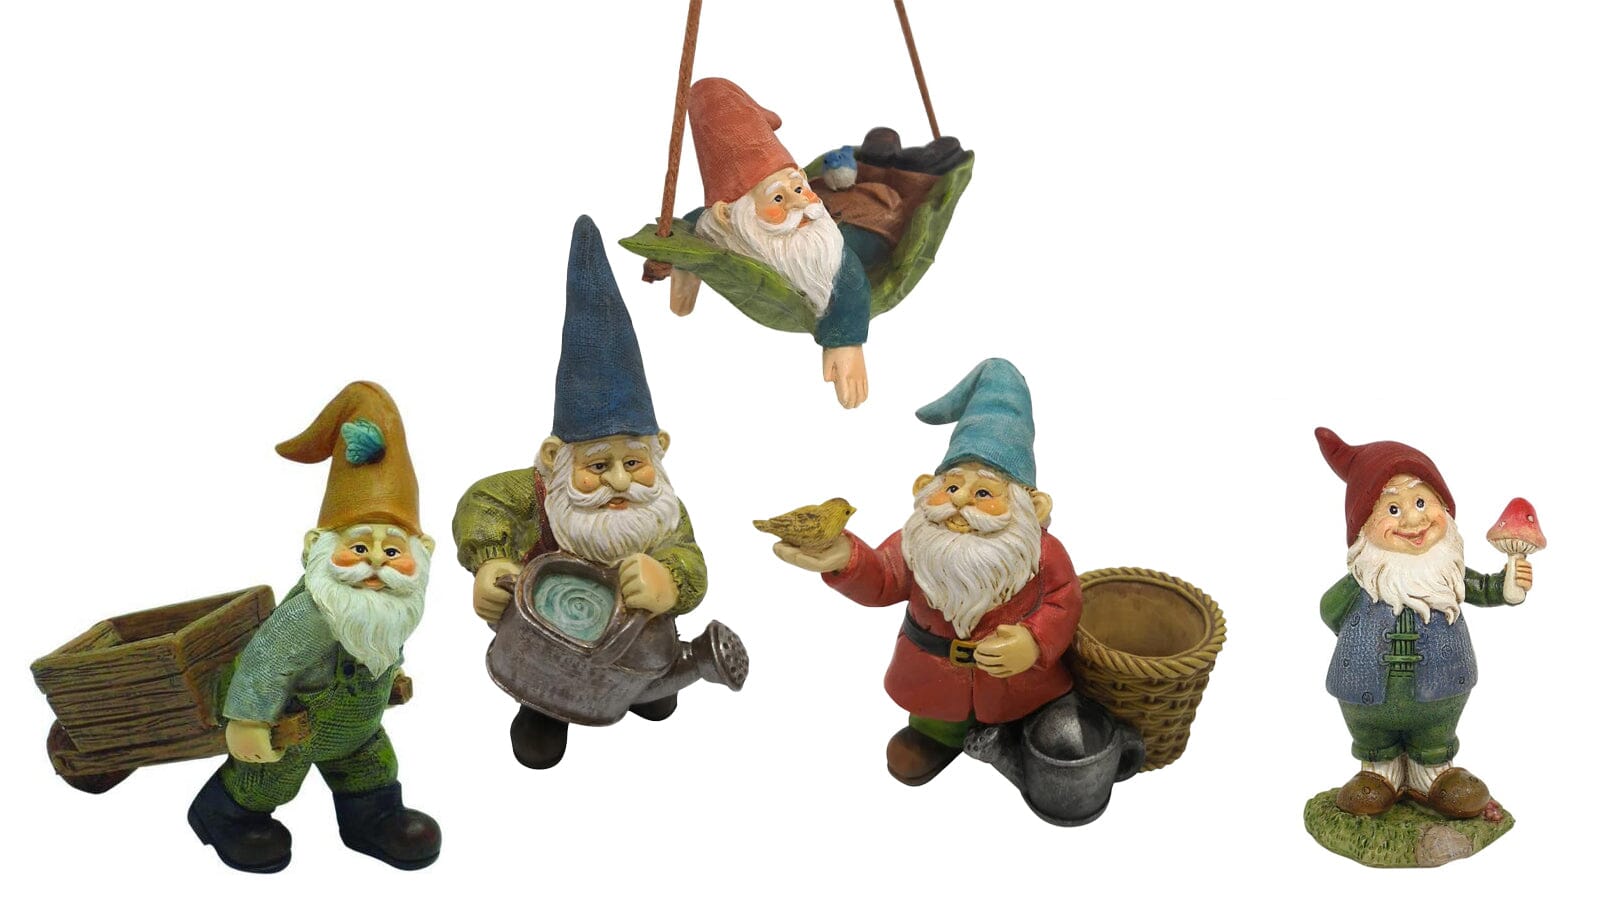 The Willow Gnomes